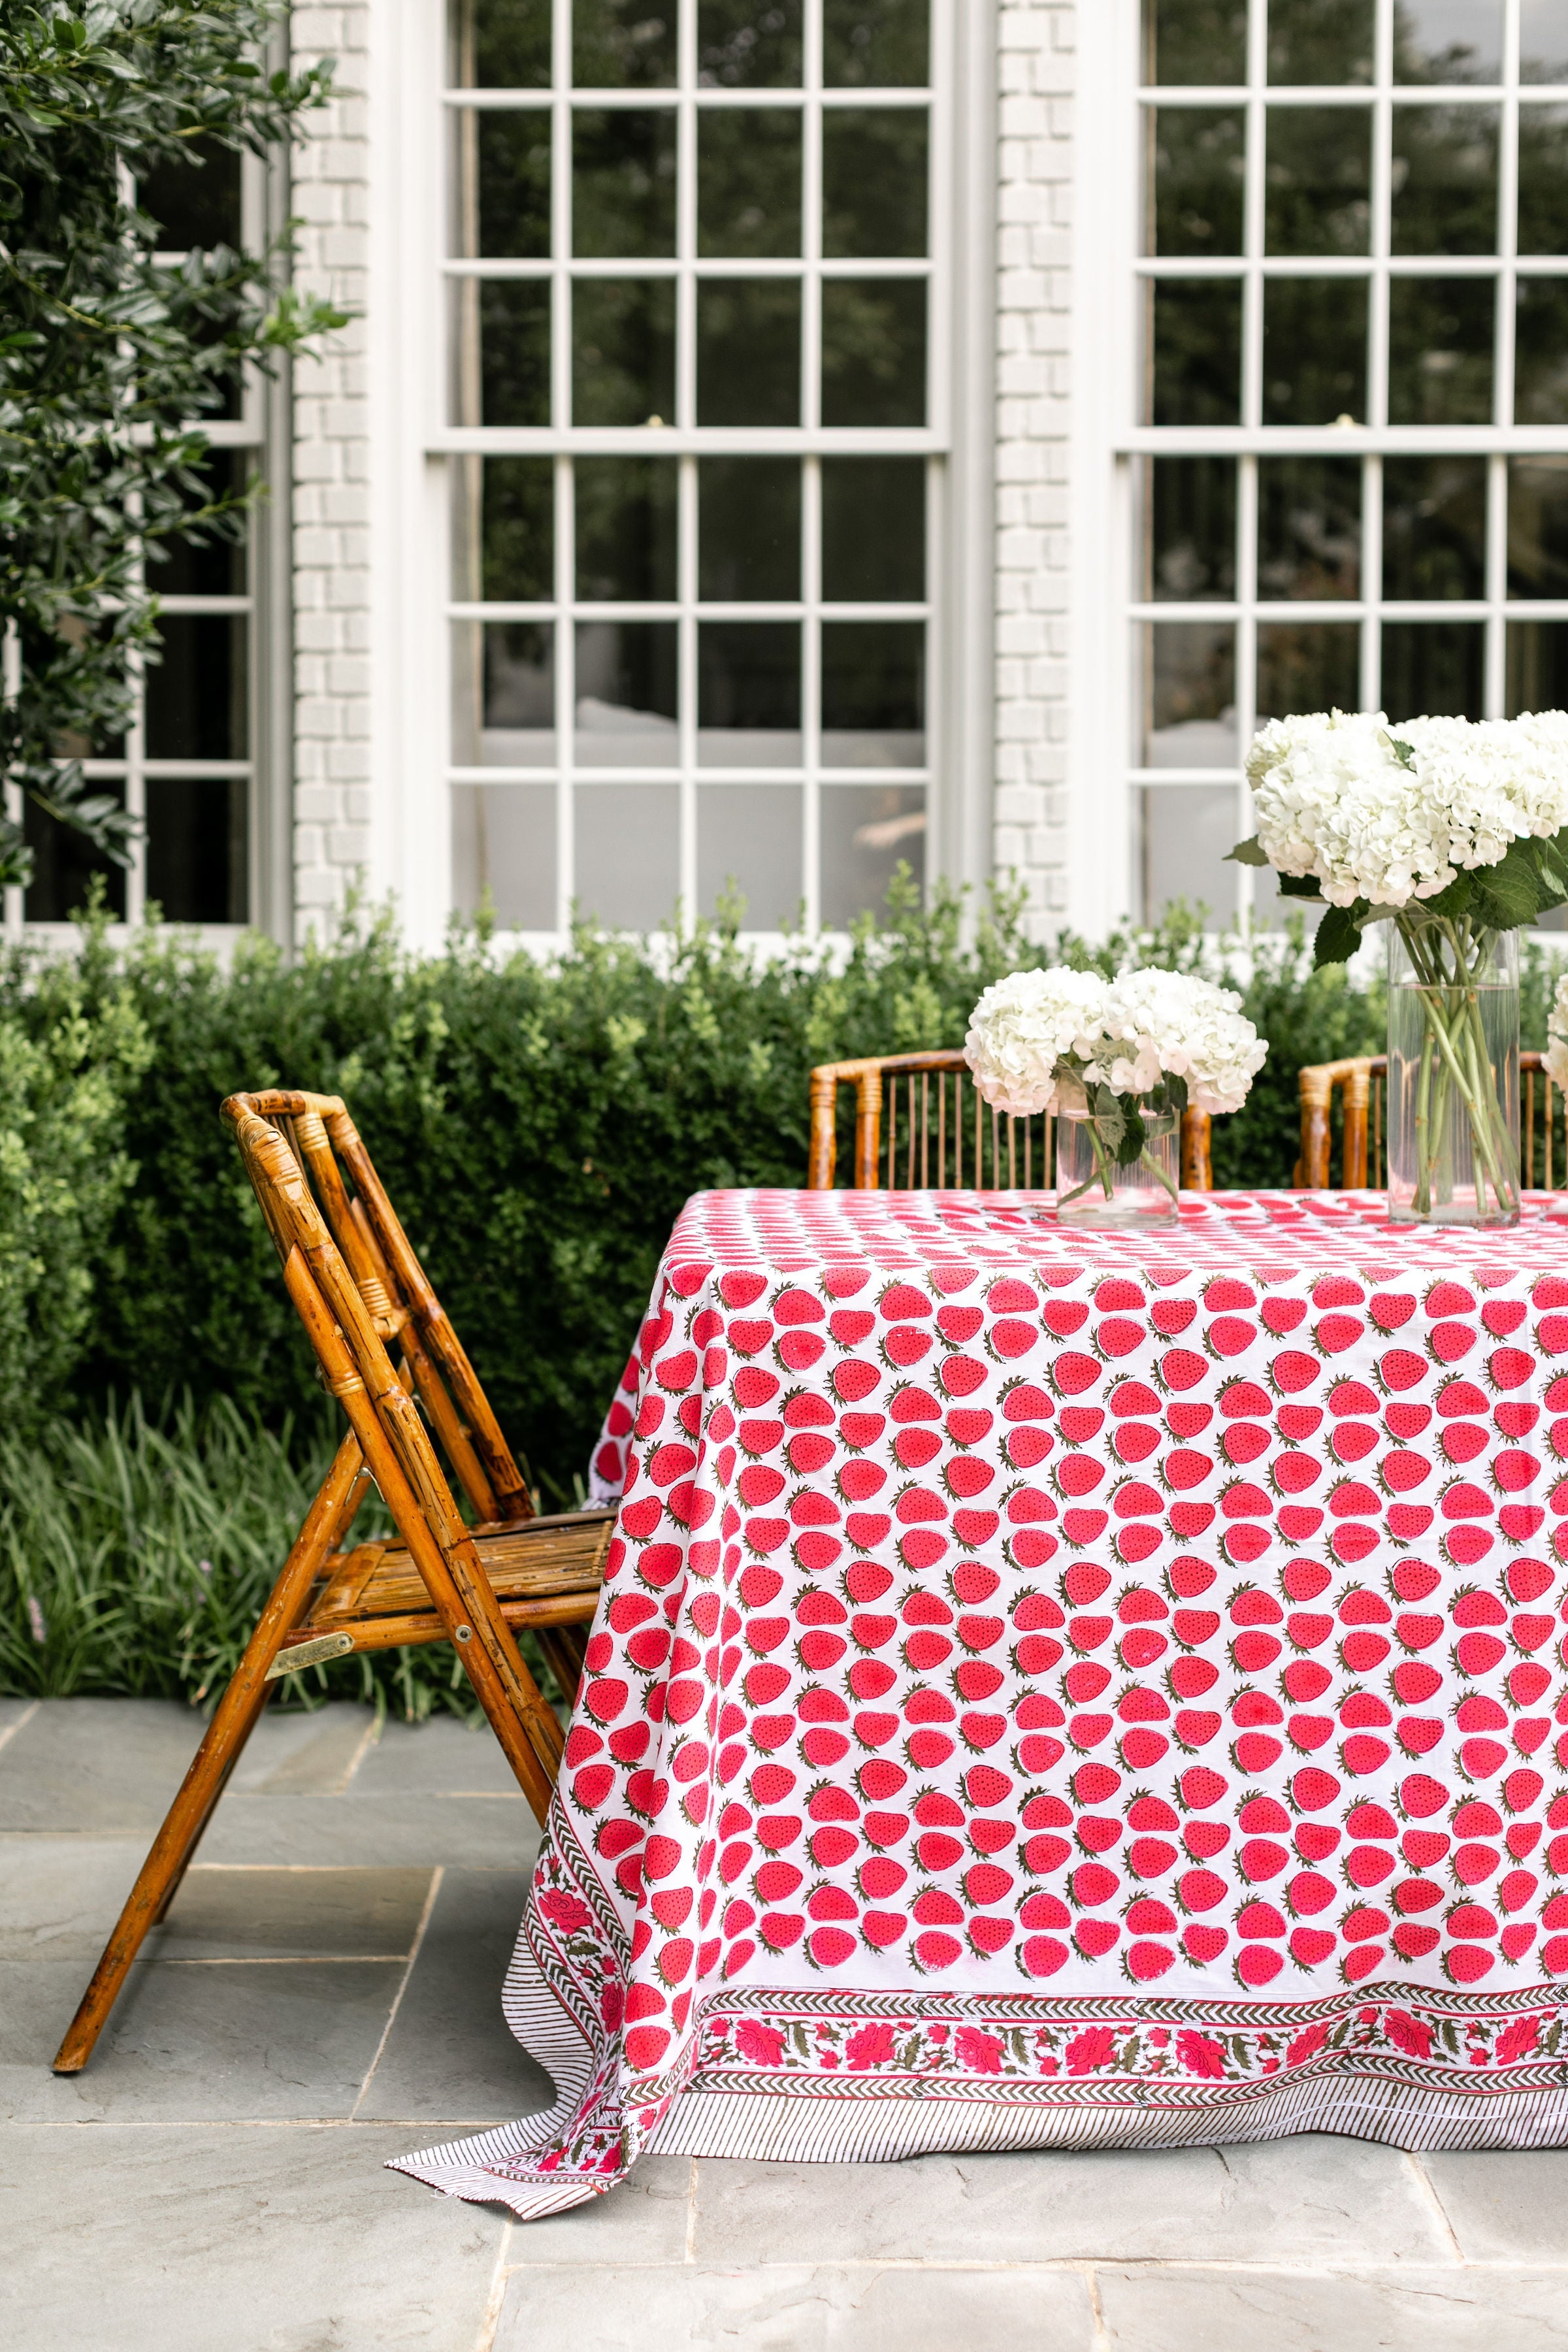 Wild Strawberry Tablecloth by Holly Harris Designs